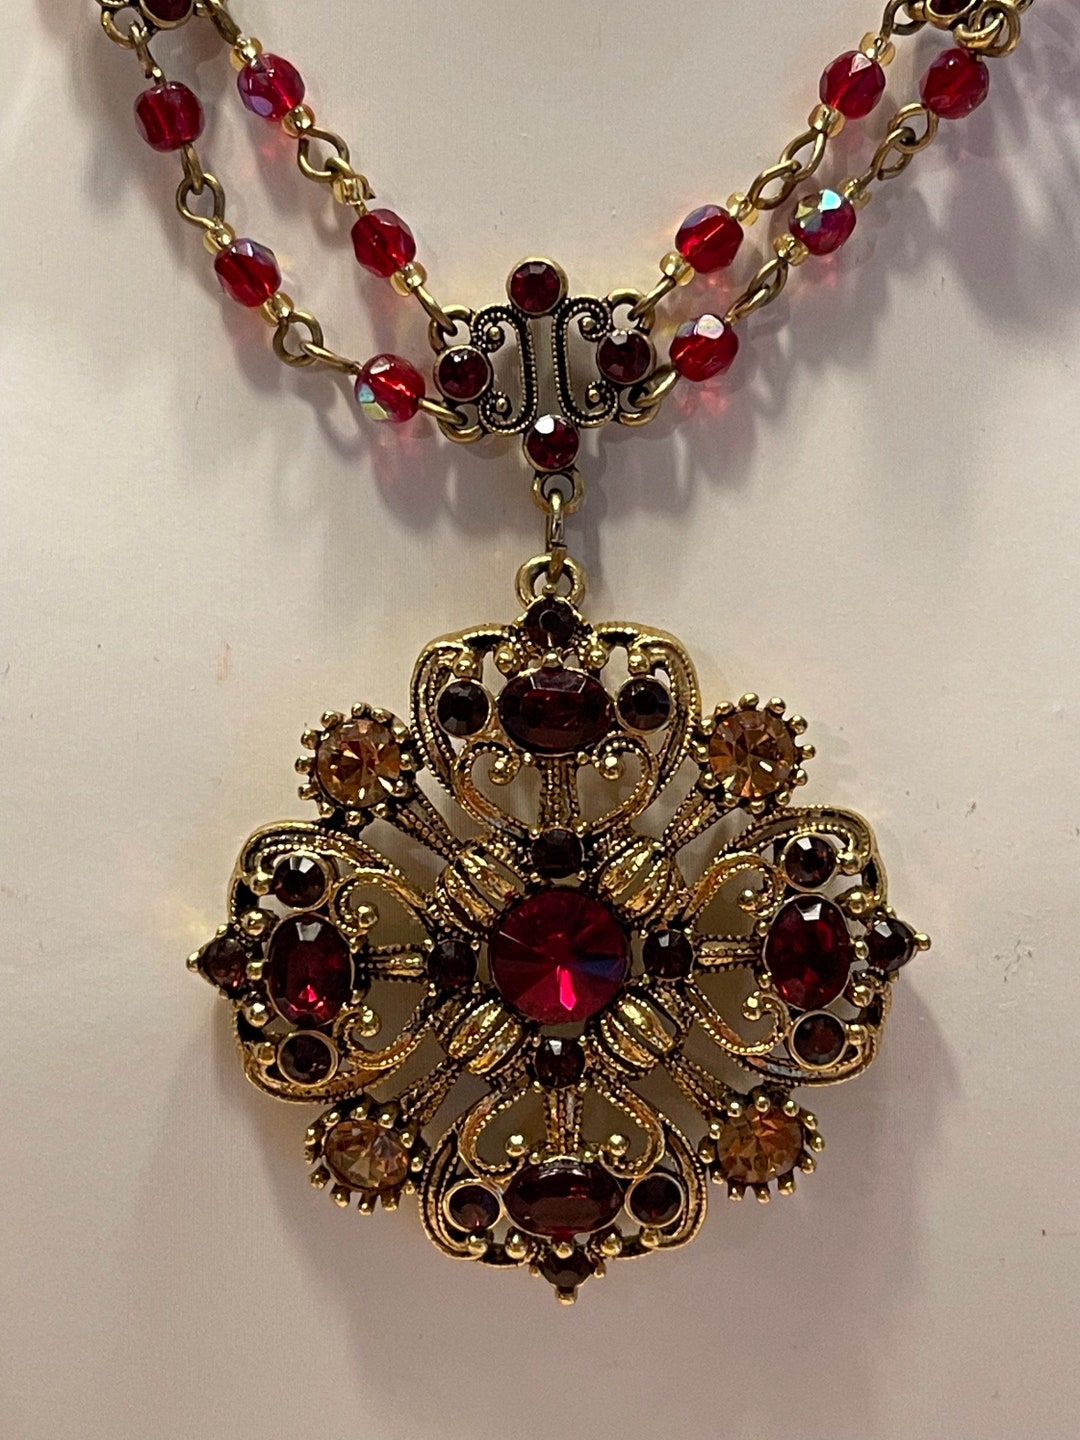 Avon Vintage Gold Pendant With Ruby Color Rhinestones - Etsy